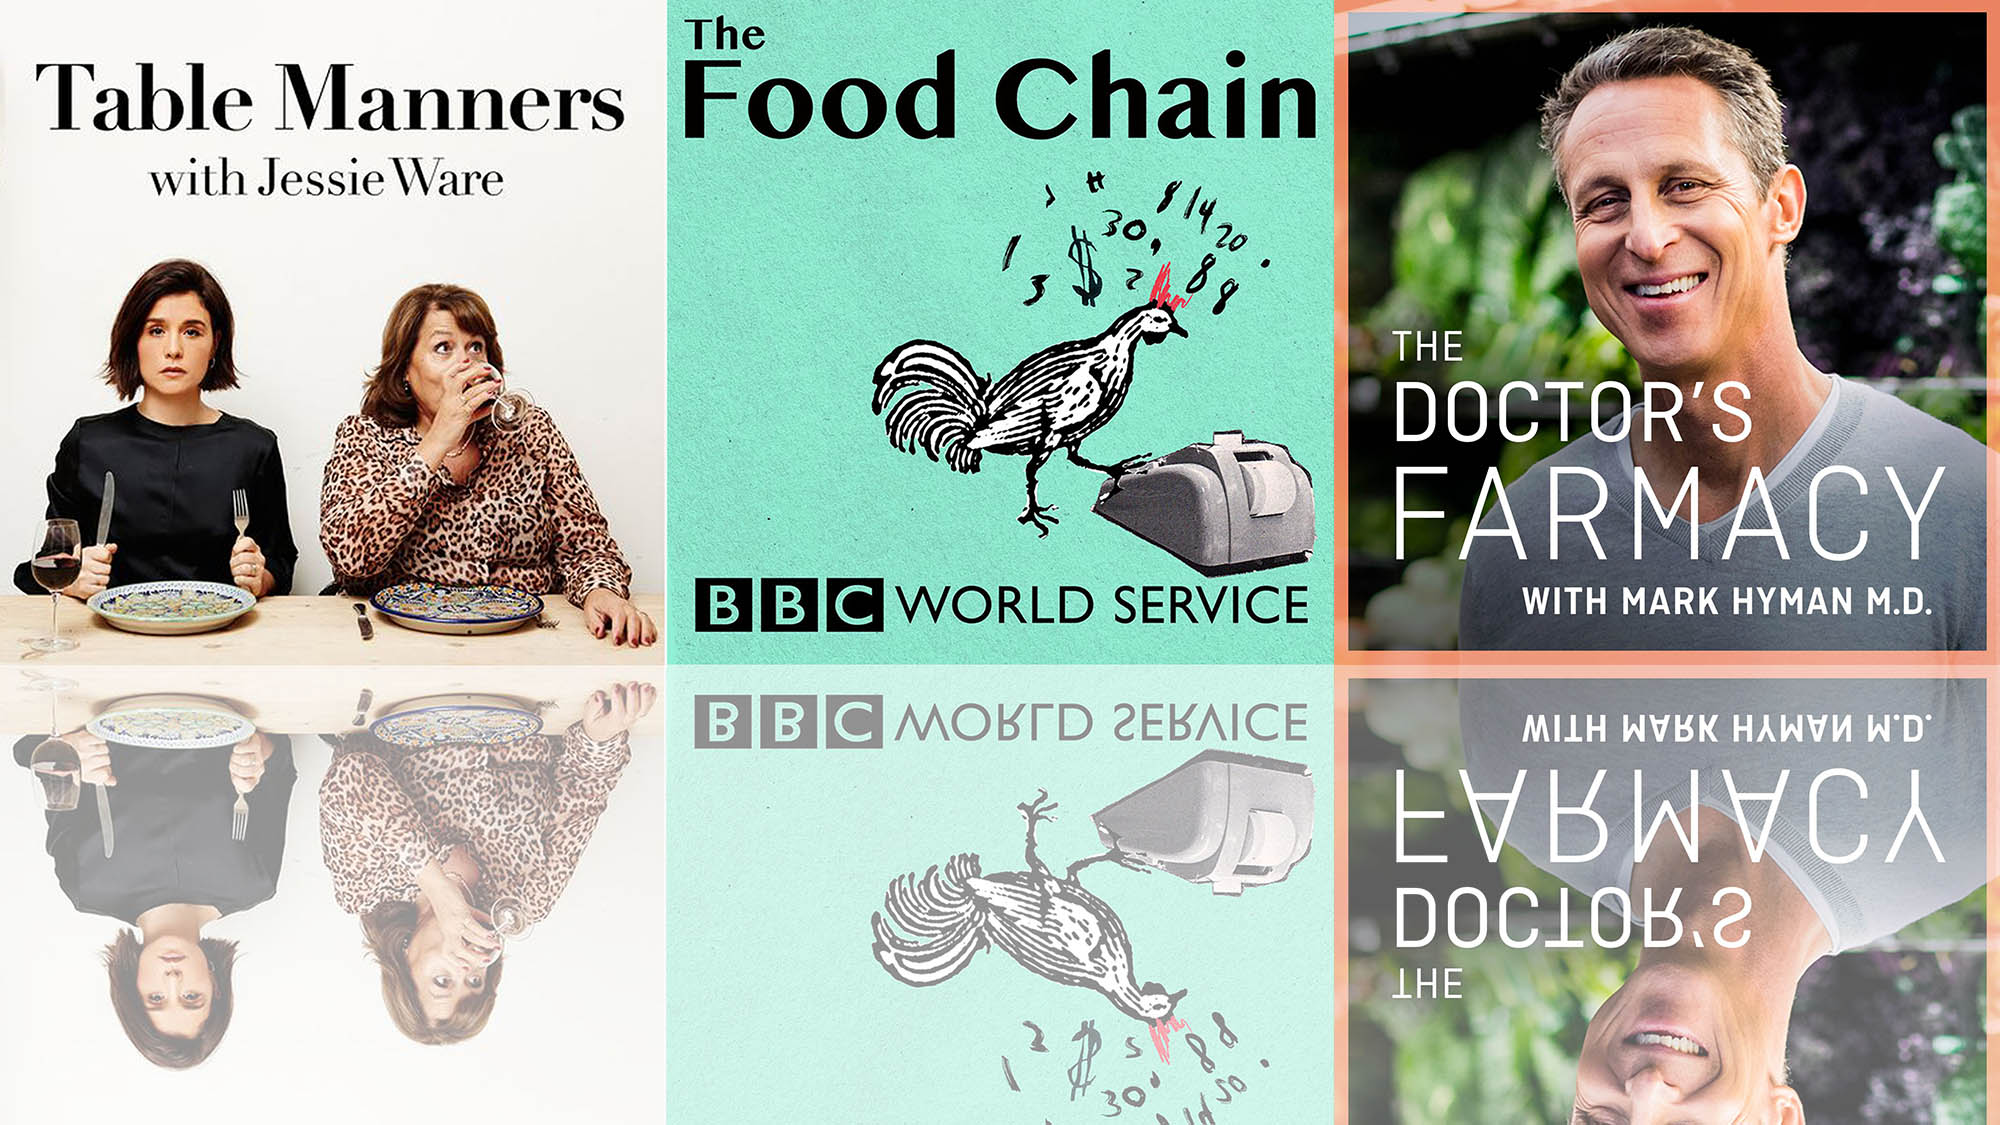 6 BEST FOOD PODCASTS CULINARY TRADITIONS, HISTORY, MENU Furthermore